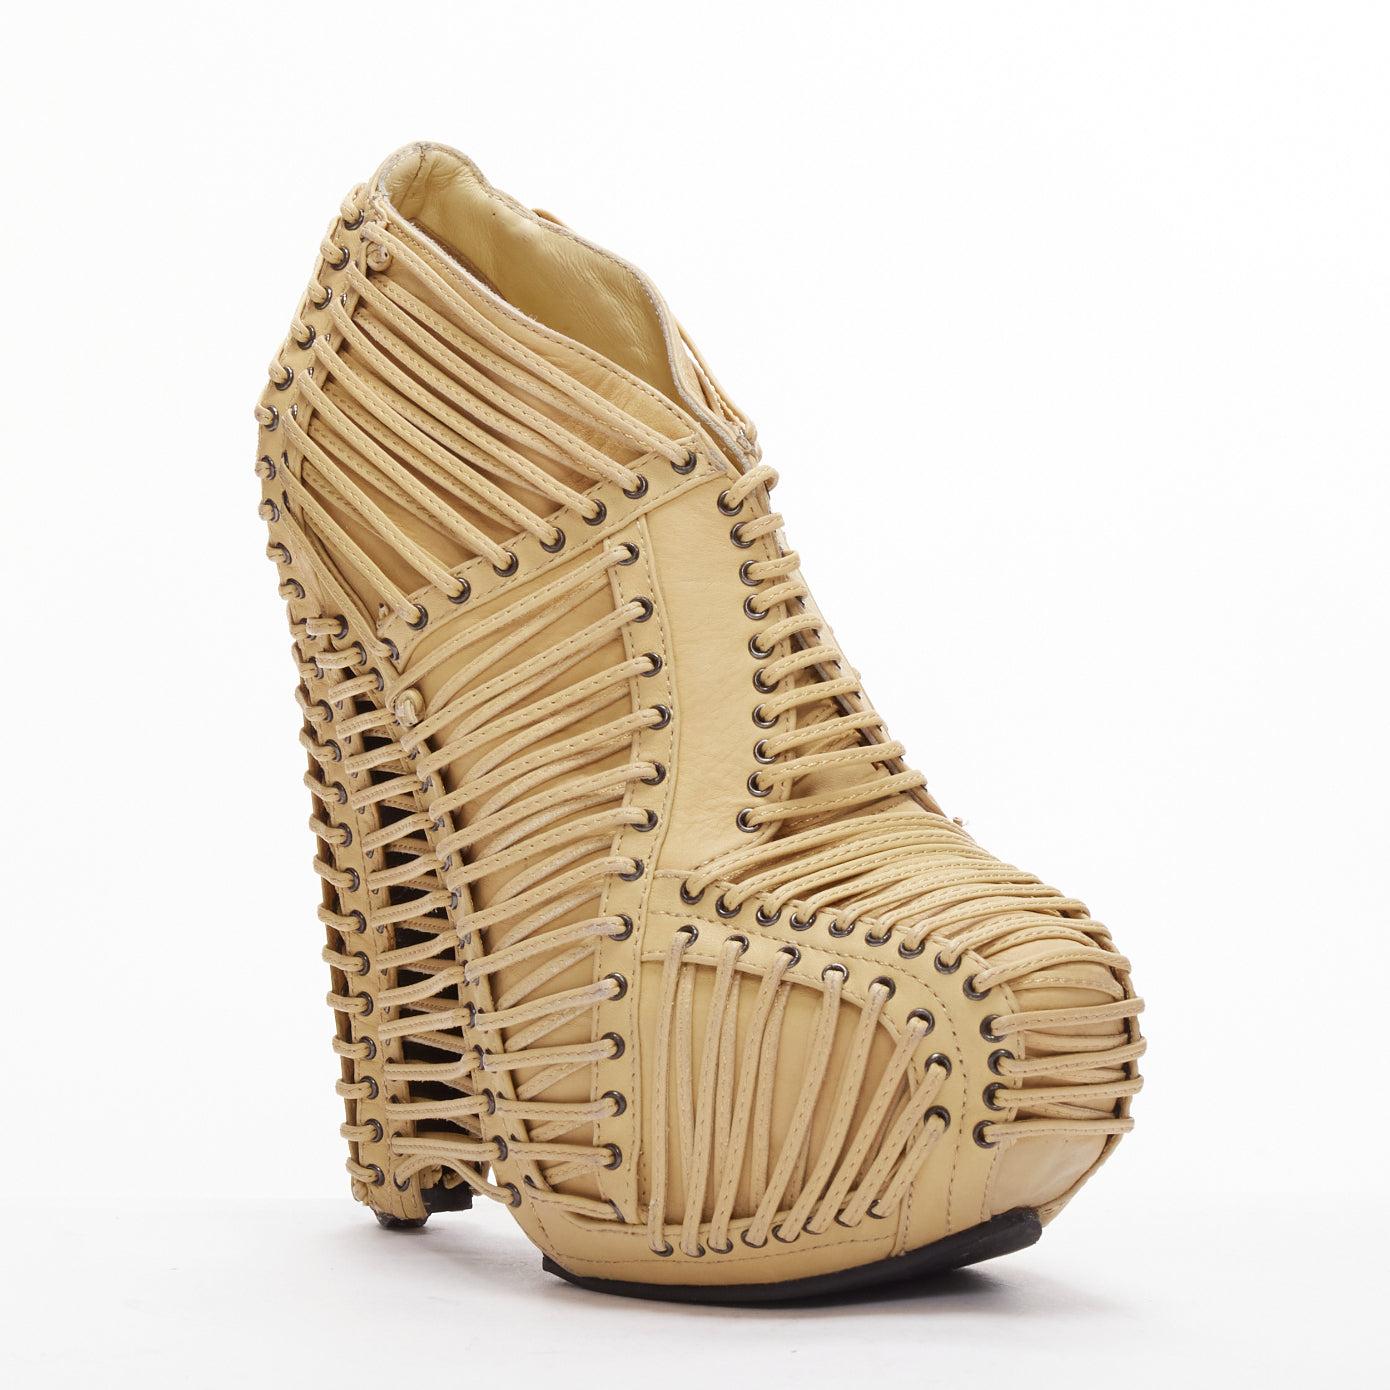 rare IRIS VAN HERPEN UNITED NUDE laced architectural ankle booties EU39
Reference: TGAS/D00647
Brand: Iris van Herpen
Collection: United Nude 2011 - Runway
As seen on: Kim Kardashian
Material: Leather
Color: Nude
Pattern: Solid
Closure: Lace